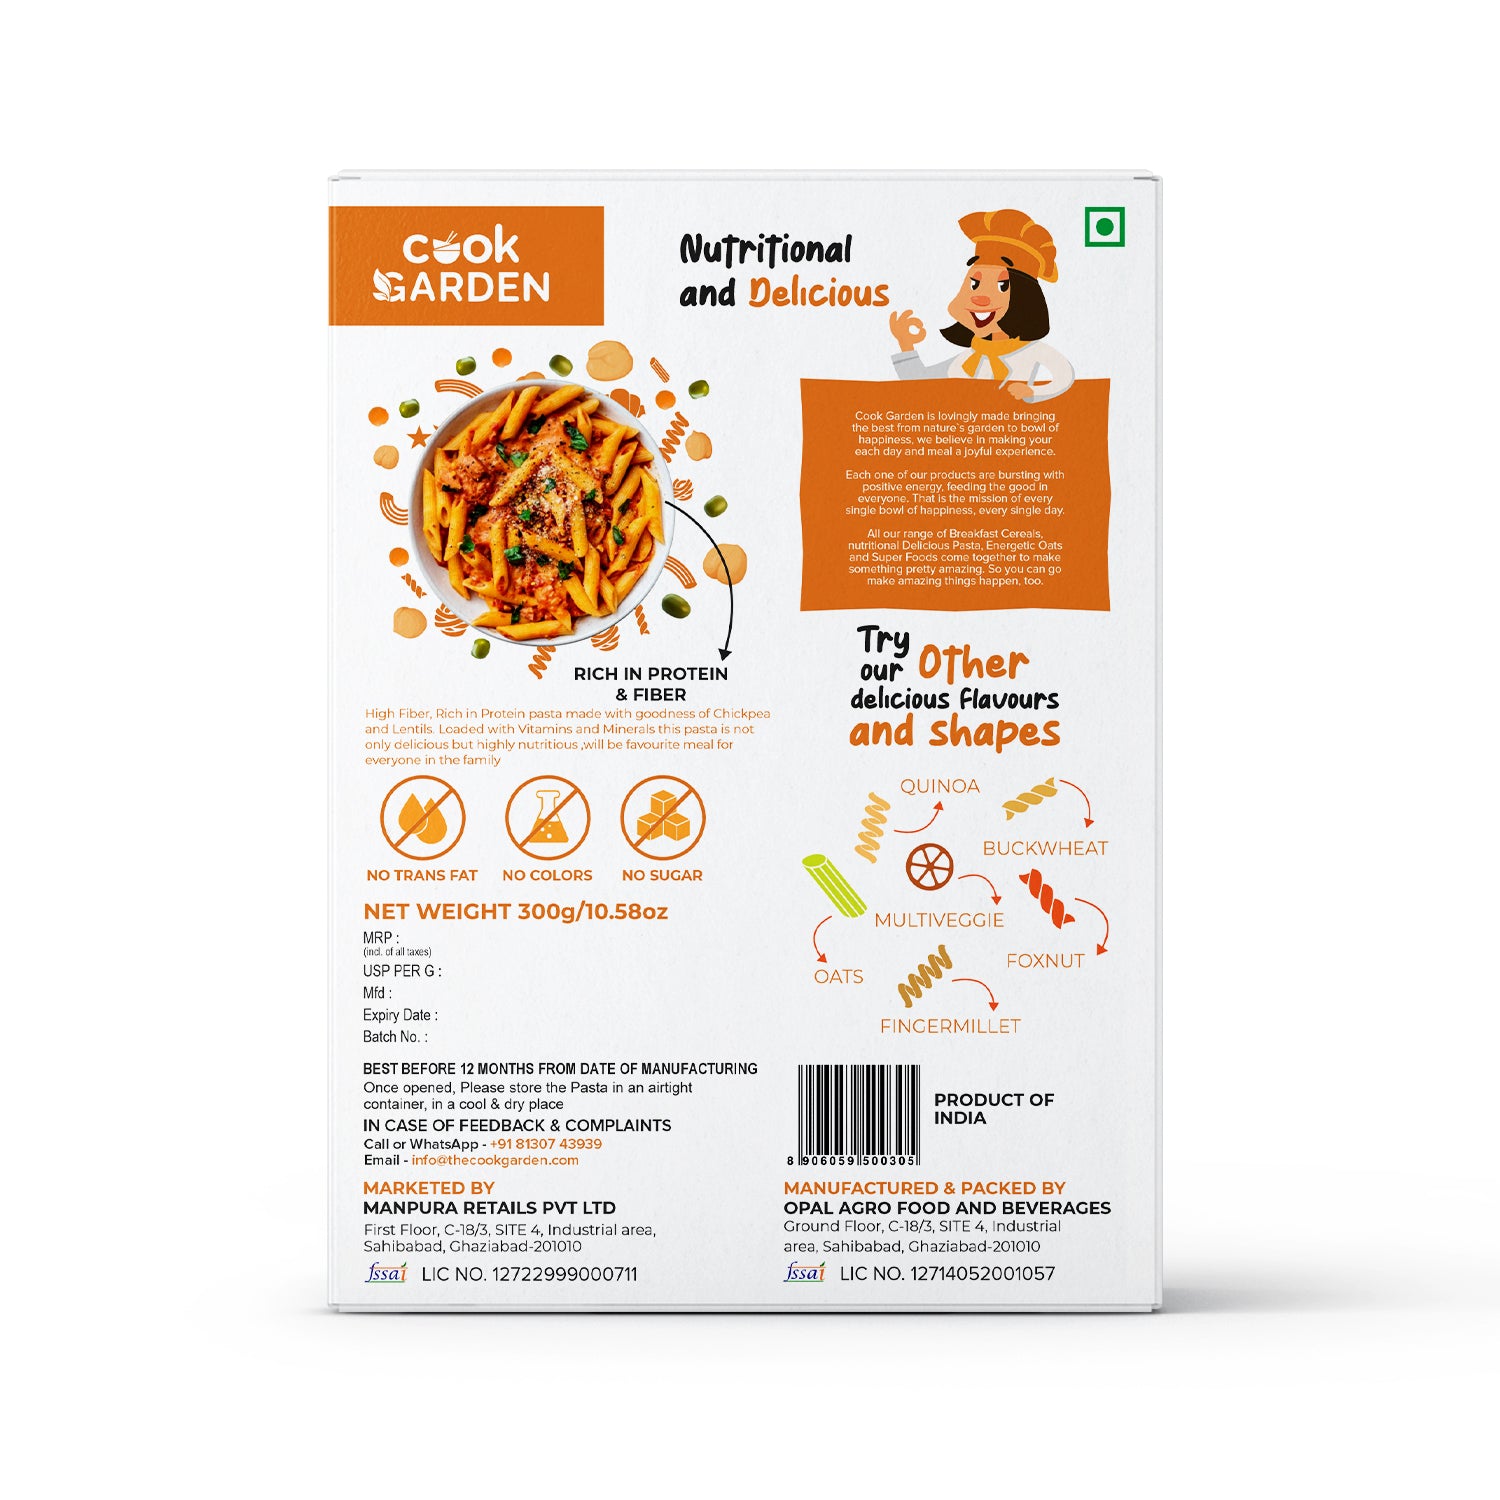 Chickpea lentil & Oats Pasta | Healthy Pasta | Pack Of 2